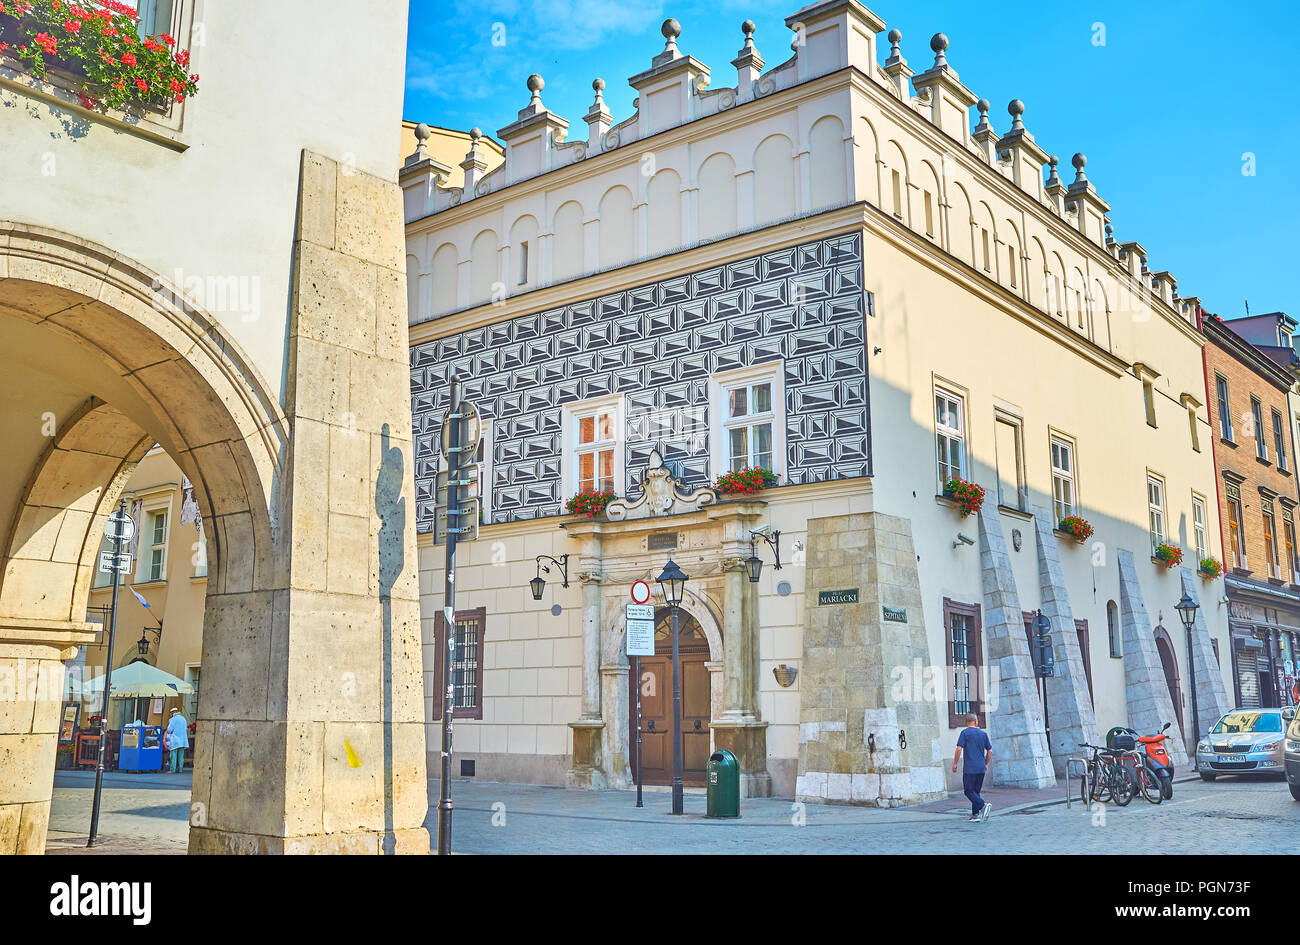 KRAKOW, POLAND - JUNE 11, 2018: Beautiful medieval edifice in old Krakow boasts buttresses on its walls, on June 11 in Krakow. Stock Photo